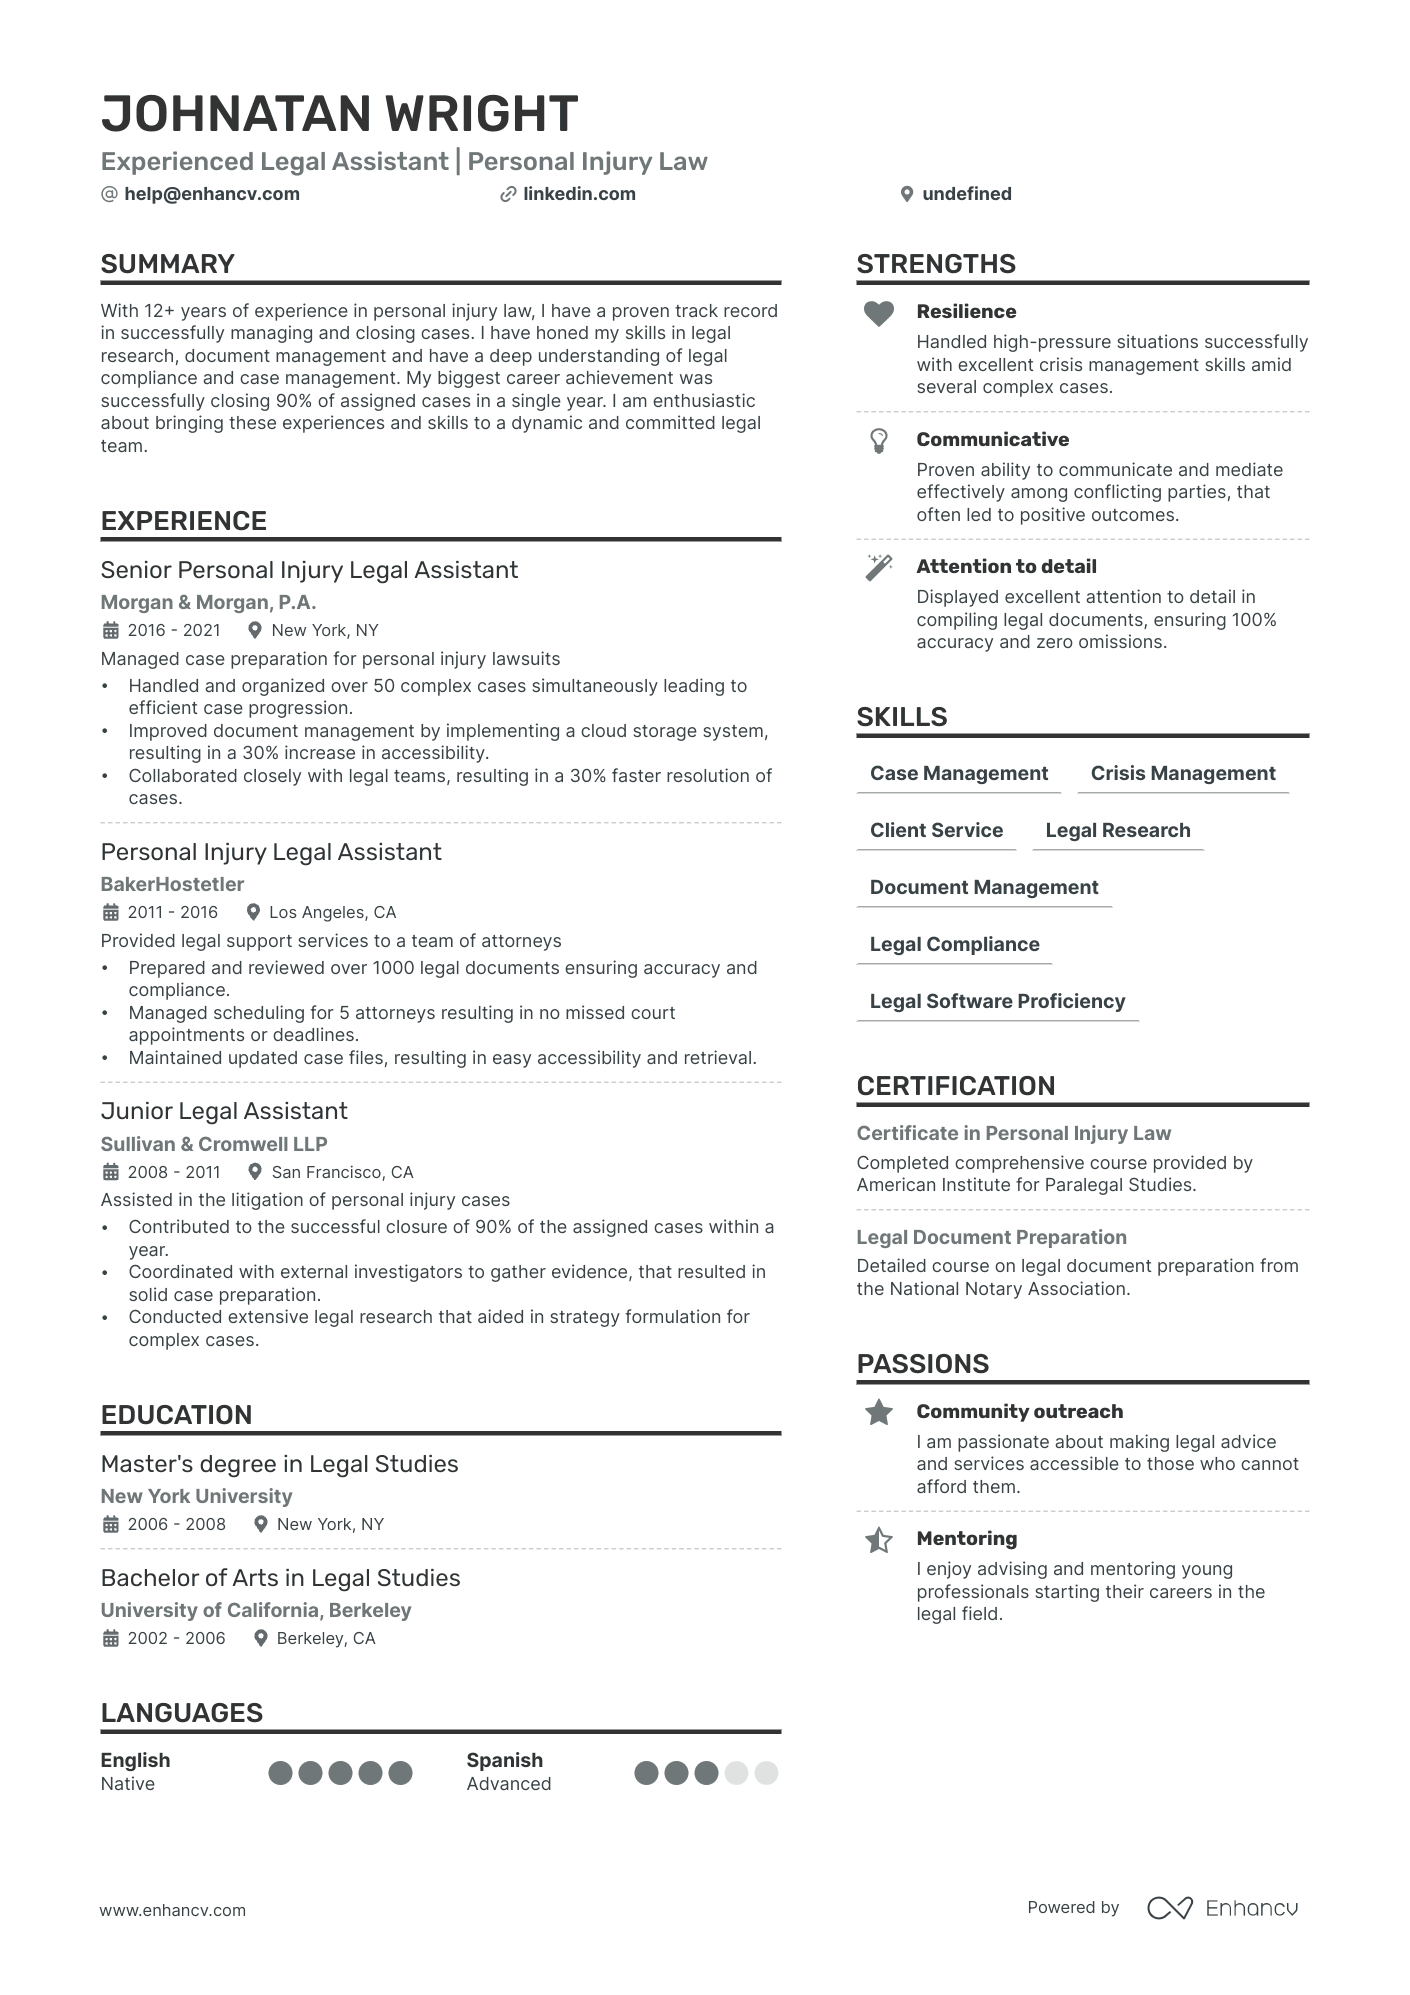 Personal Injury Legal Assistant resume example